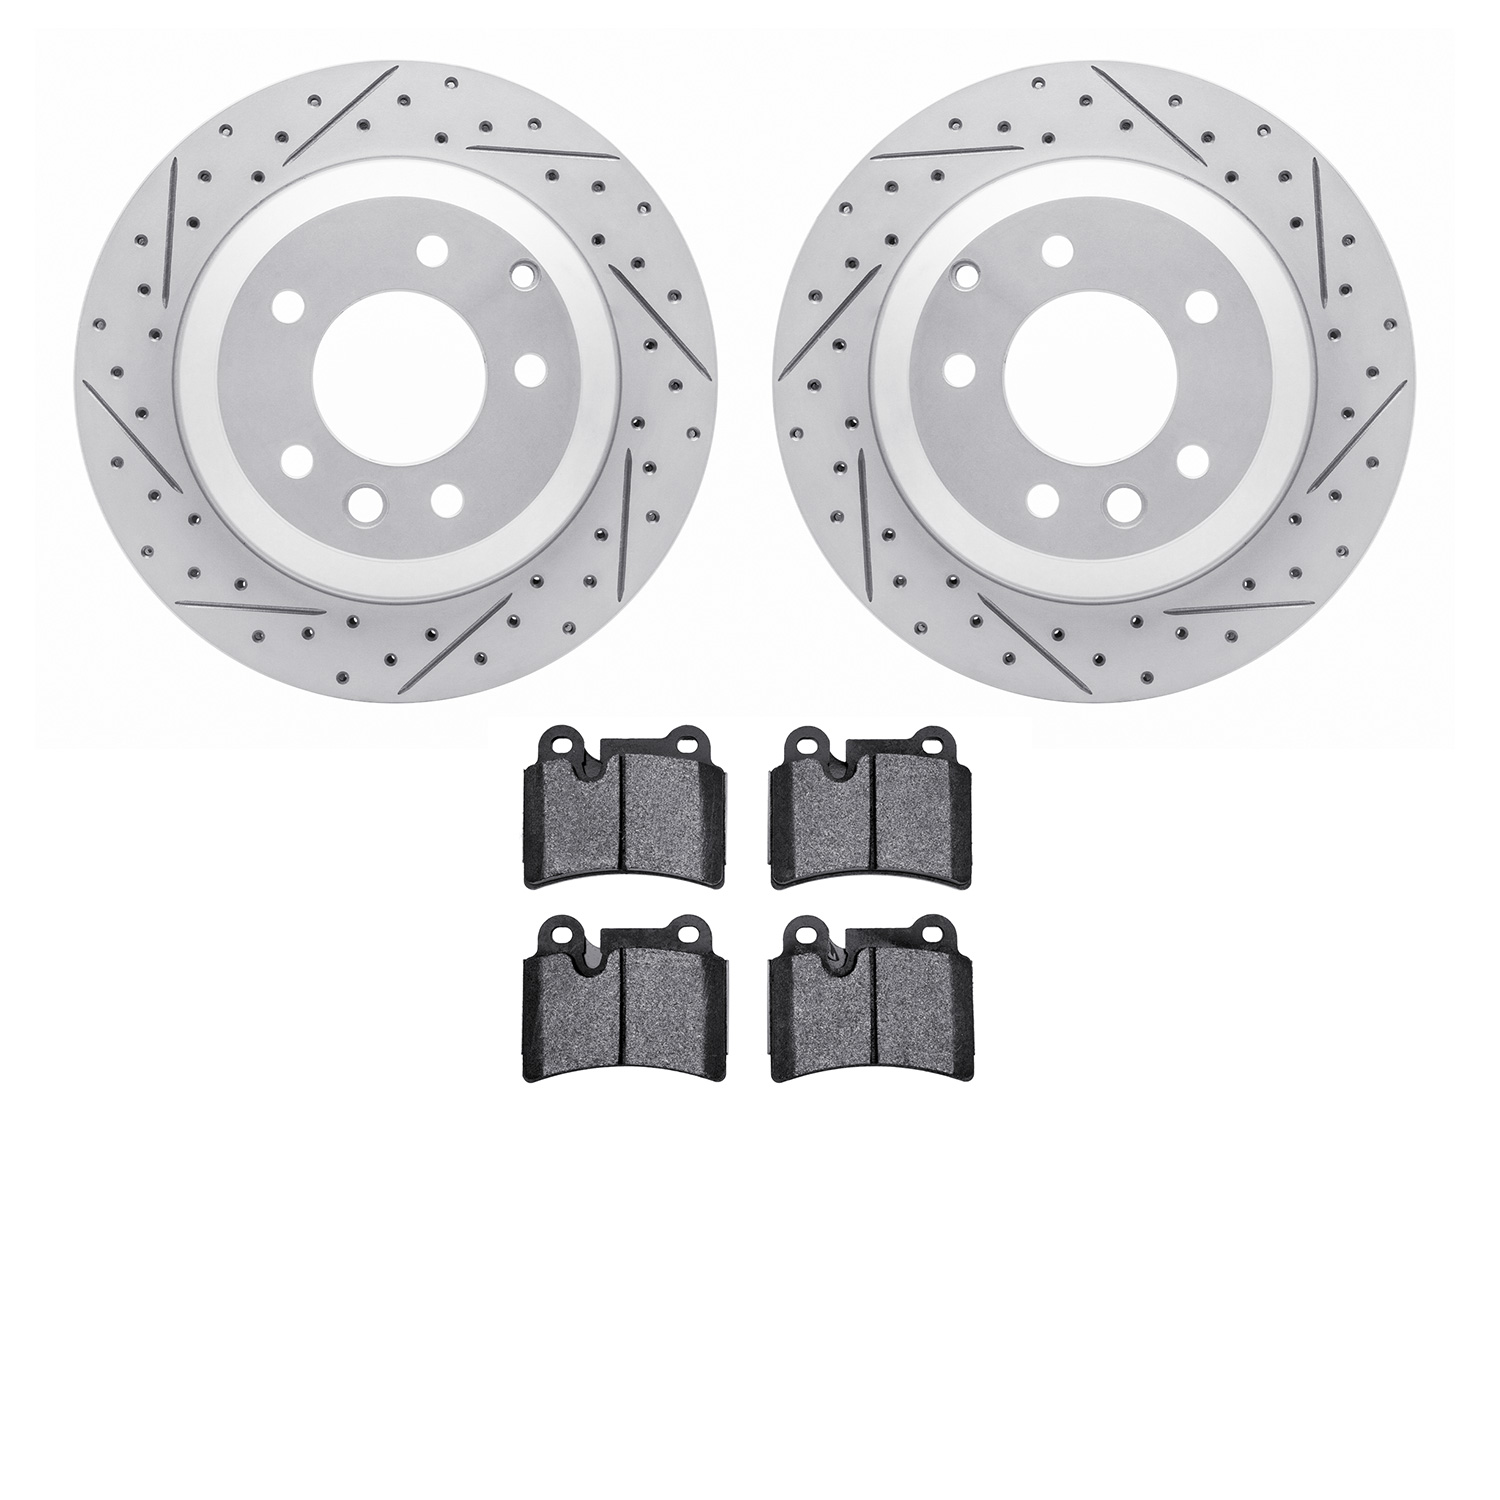 2502-74064 Geoperformance Drilled/Slotted Rotors w/5000 Advanced Brake Pads Kit, 2008-2009 Audi/Volkswagen, Position: Rear